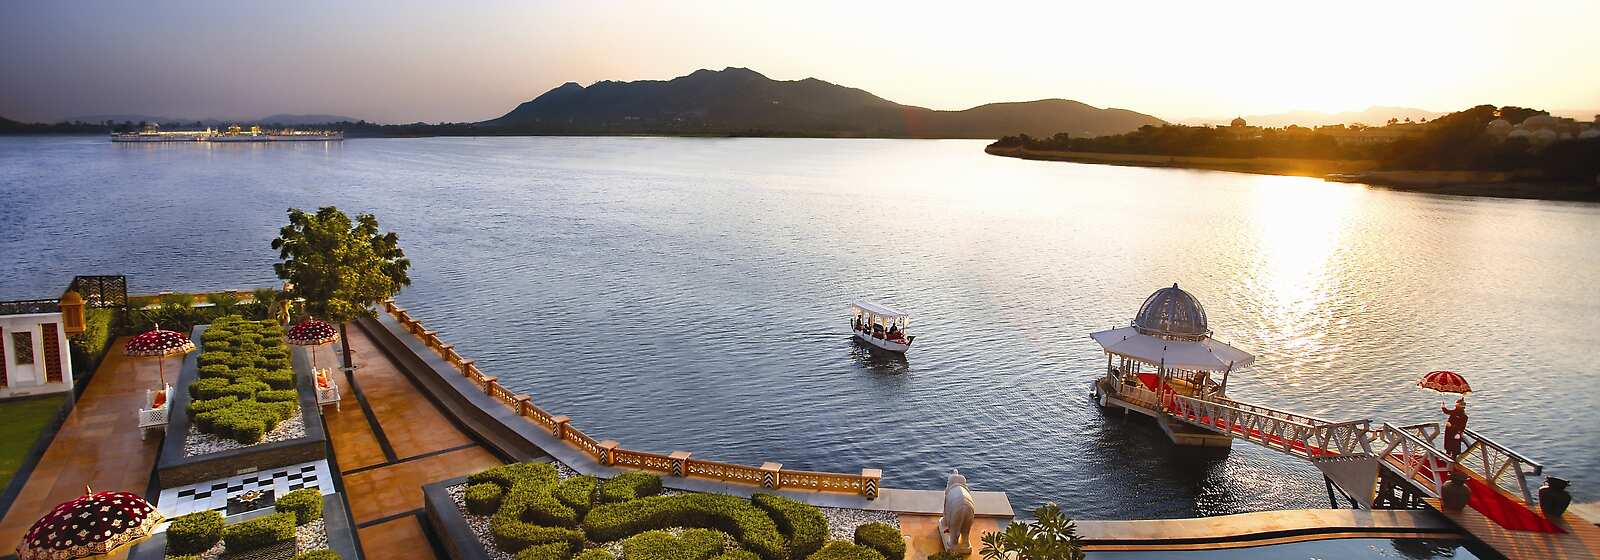 The Grand arrival of guests by boat to The Leela Palace Udaipur through the shimmering water of Lake Pichola into the main jetty